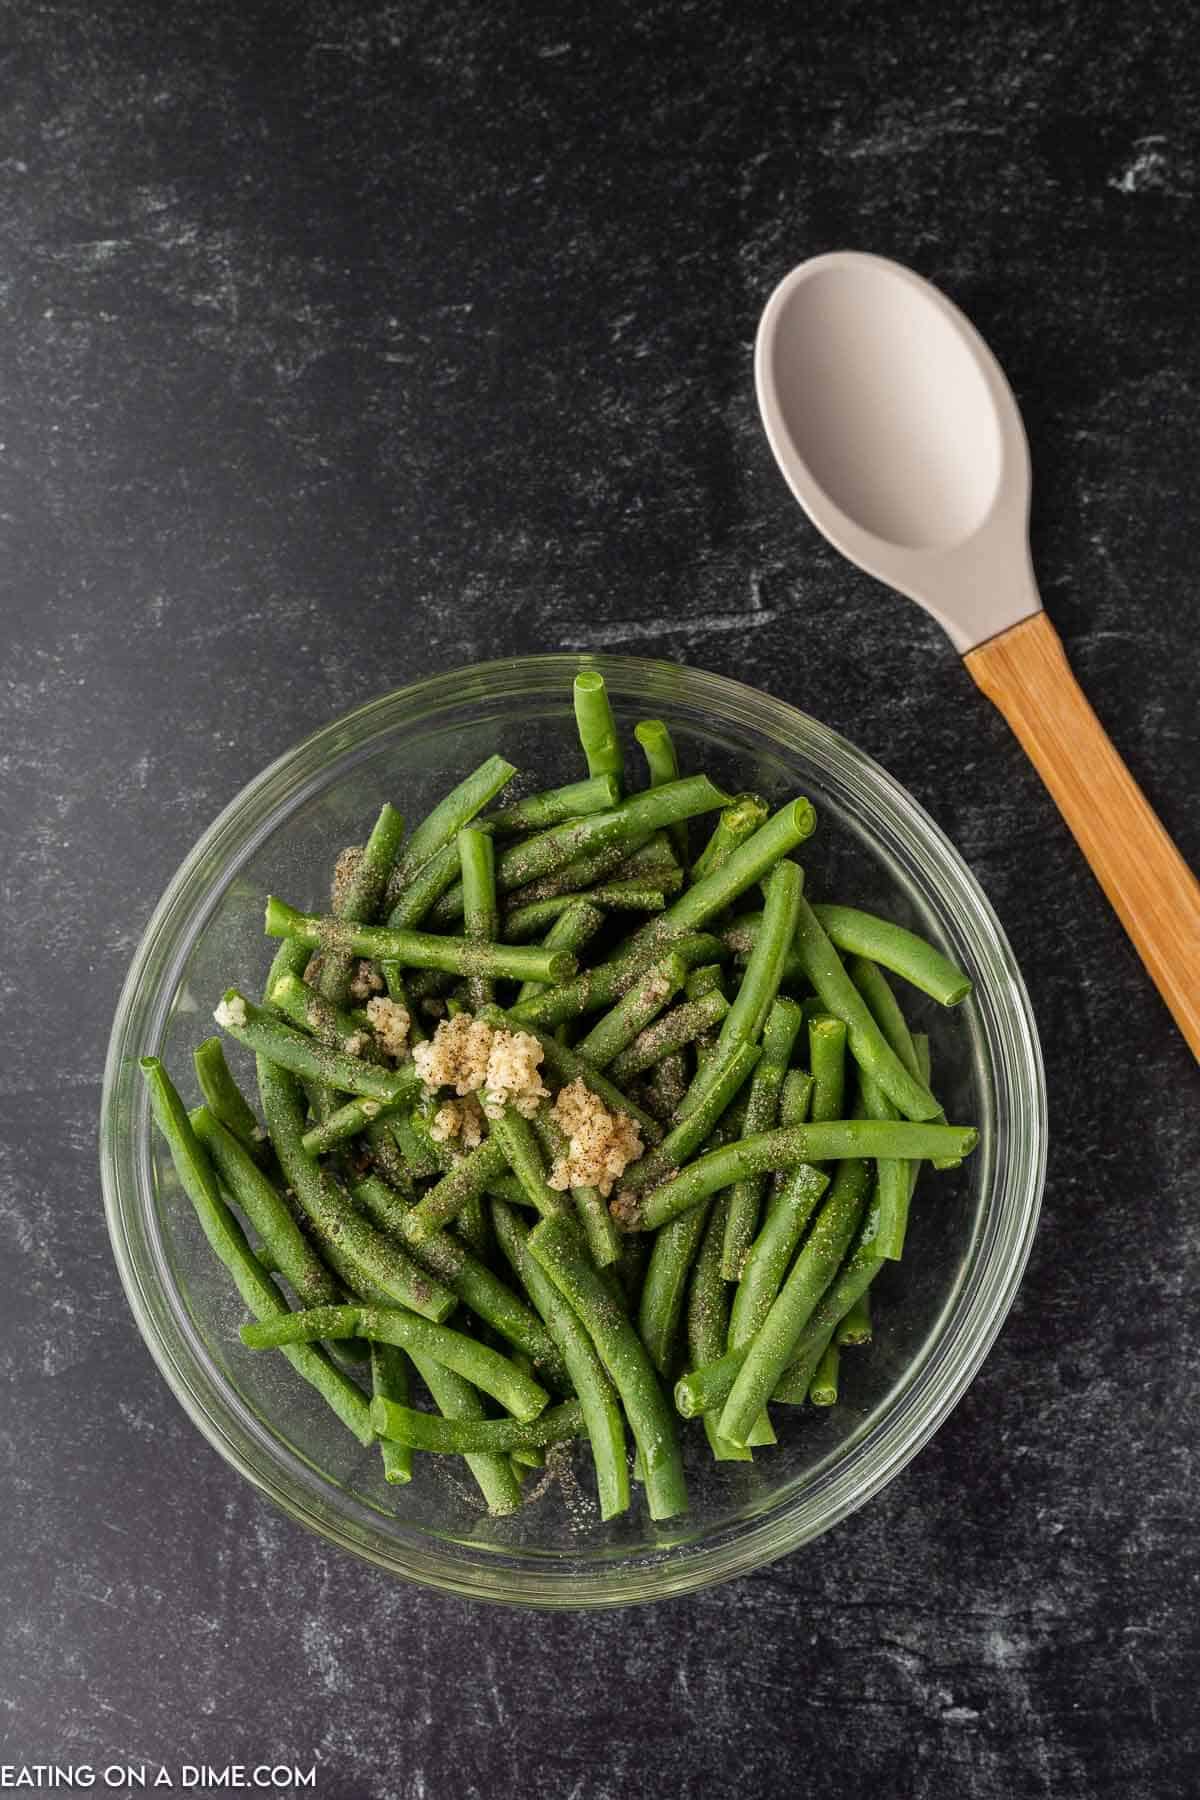 Trimmed green beans in a bowl with olive oil and seasoning